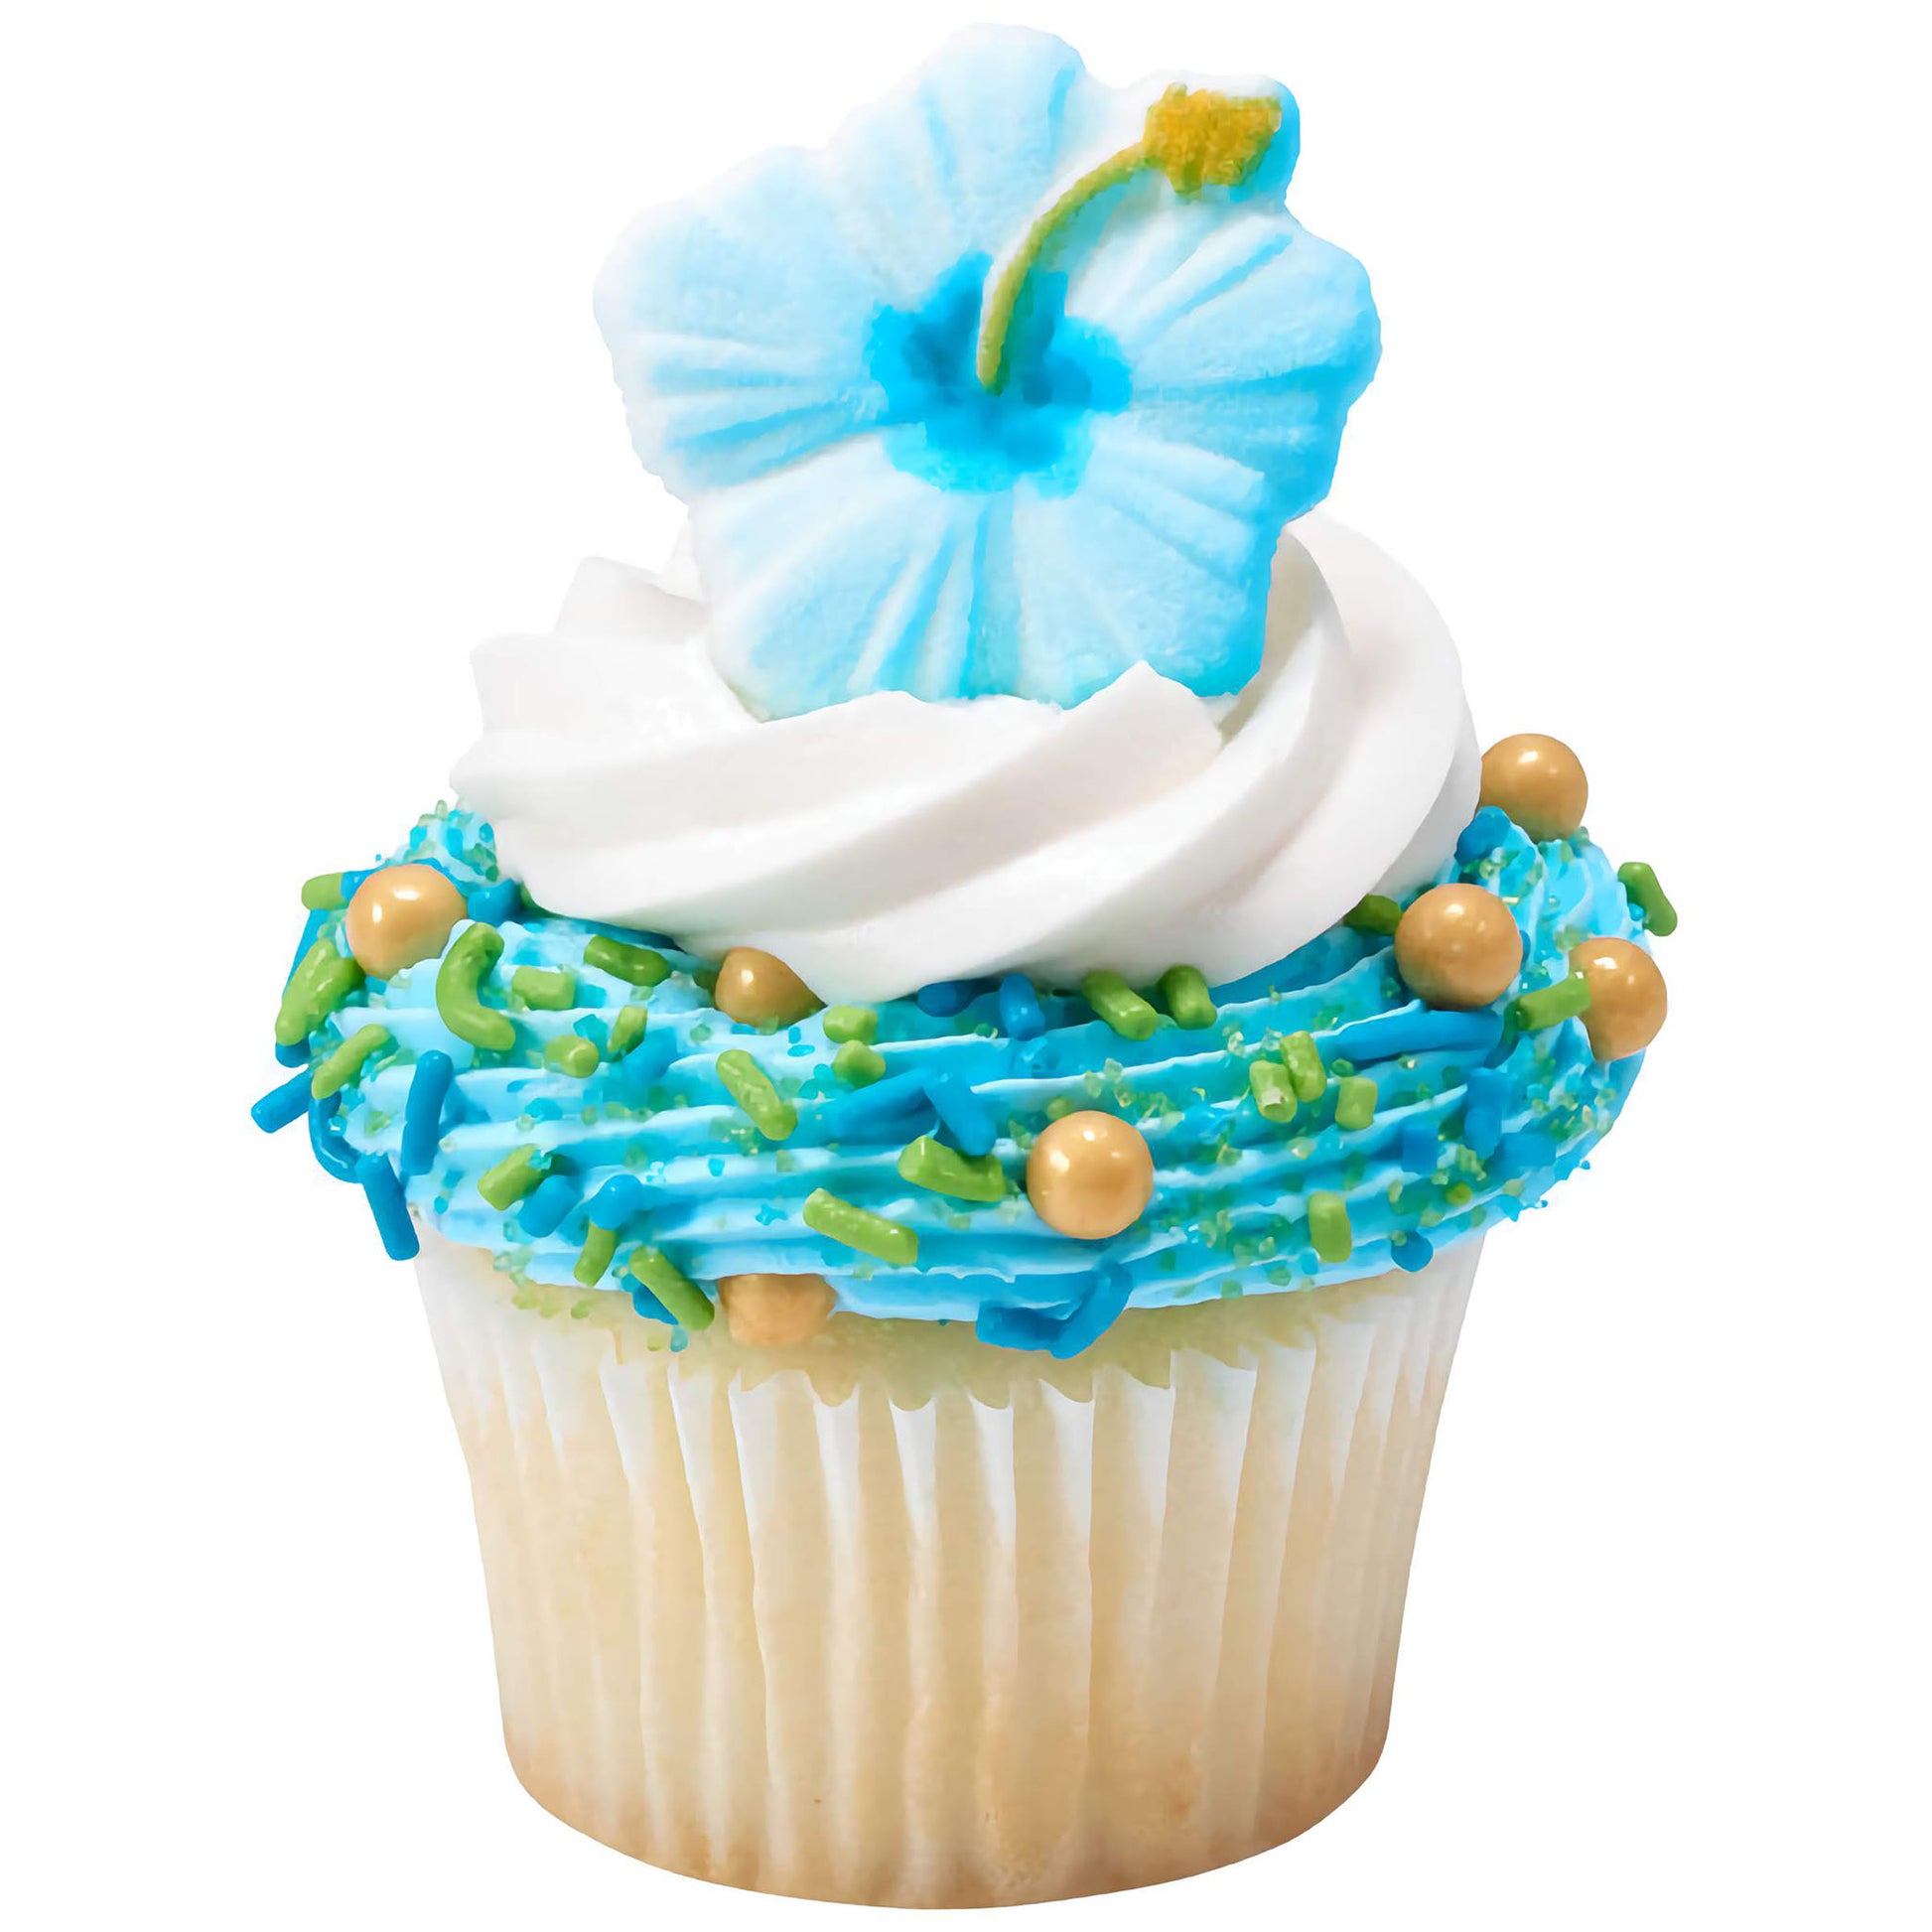 A cupcake with vibrant blue and green frosting, decorated with a large blue sugar flower and scattered with gold sugar candy beads, adding an elegant finish.